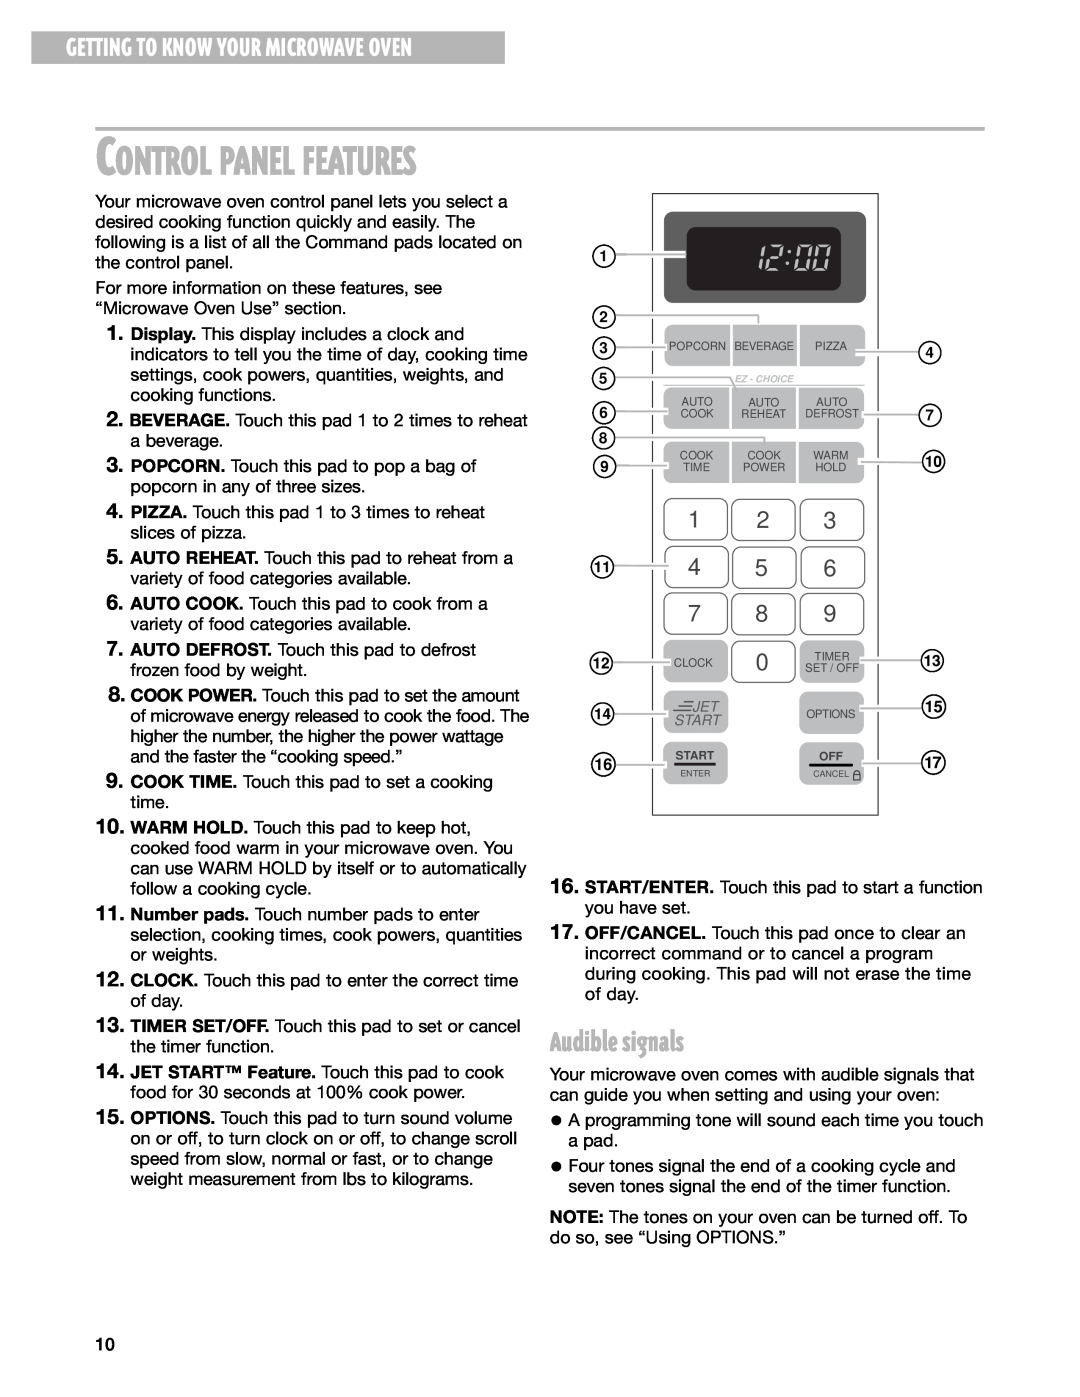 Whirlpool MT4210SL installation instructions Control Panel Features, Audible signals, Getting To Know Your Microwave Oven 